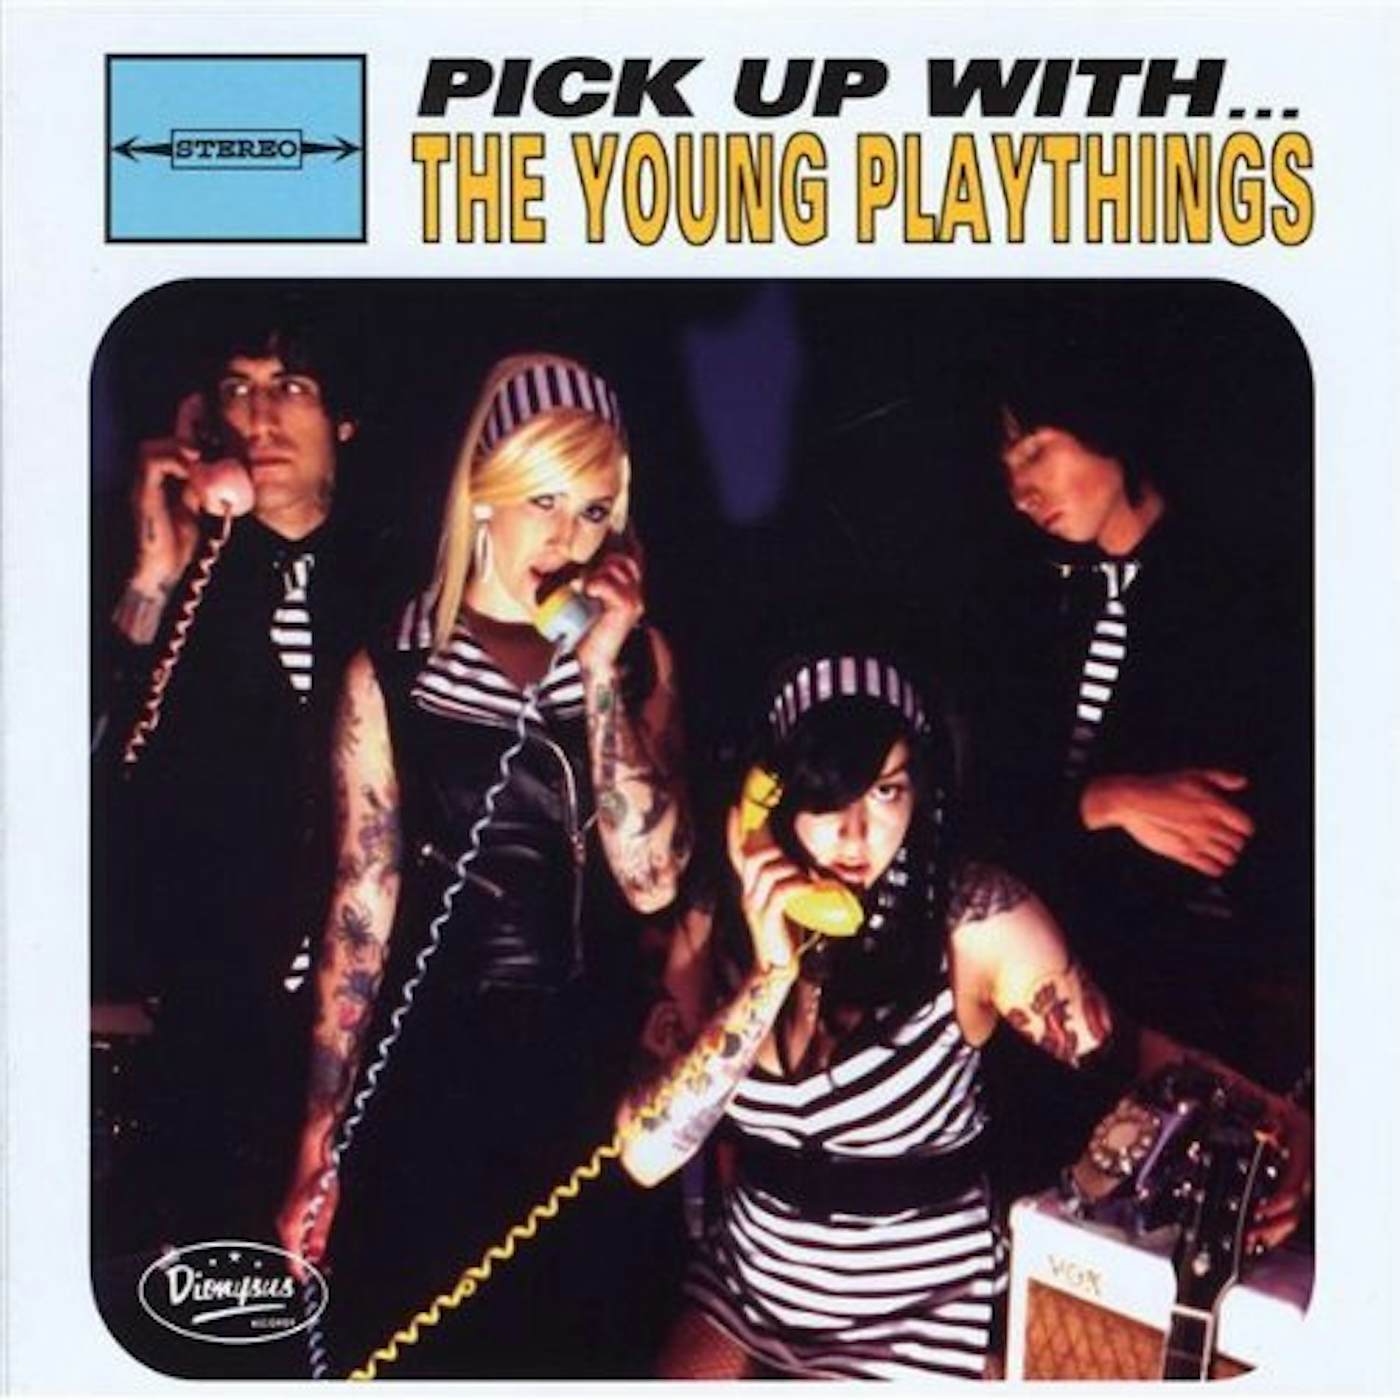 PICK UP WITH THE YOUNG PLAYTHINGS CD